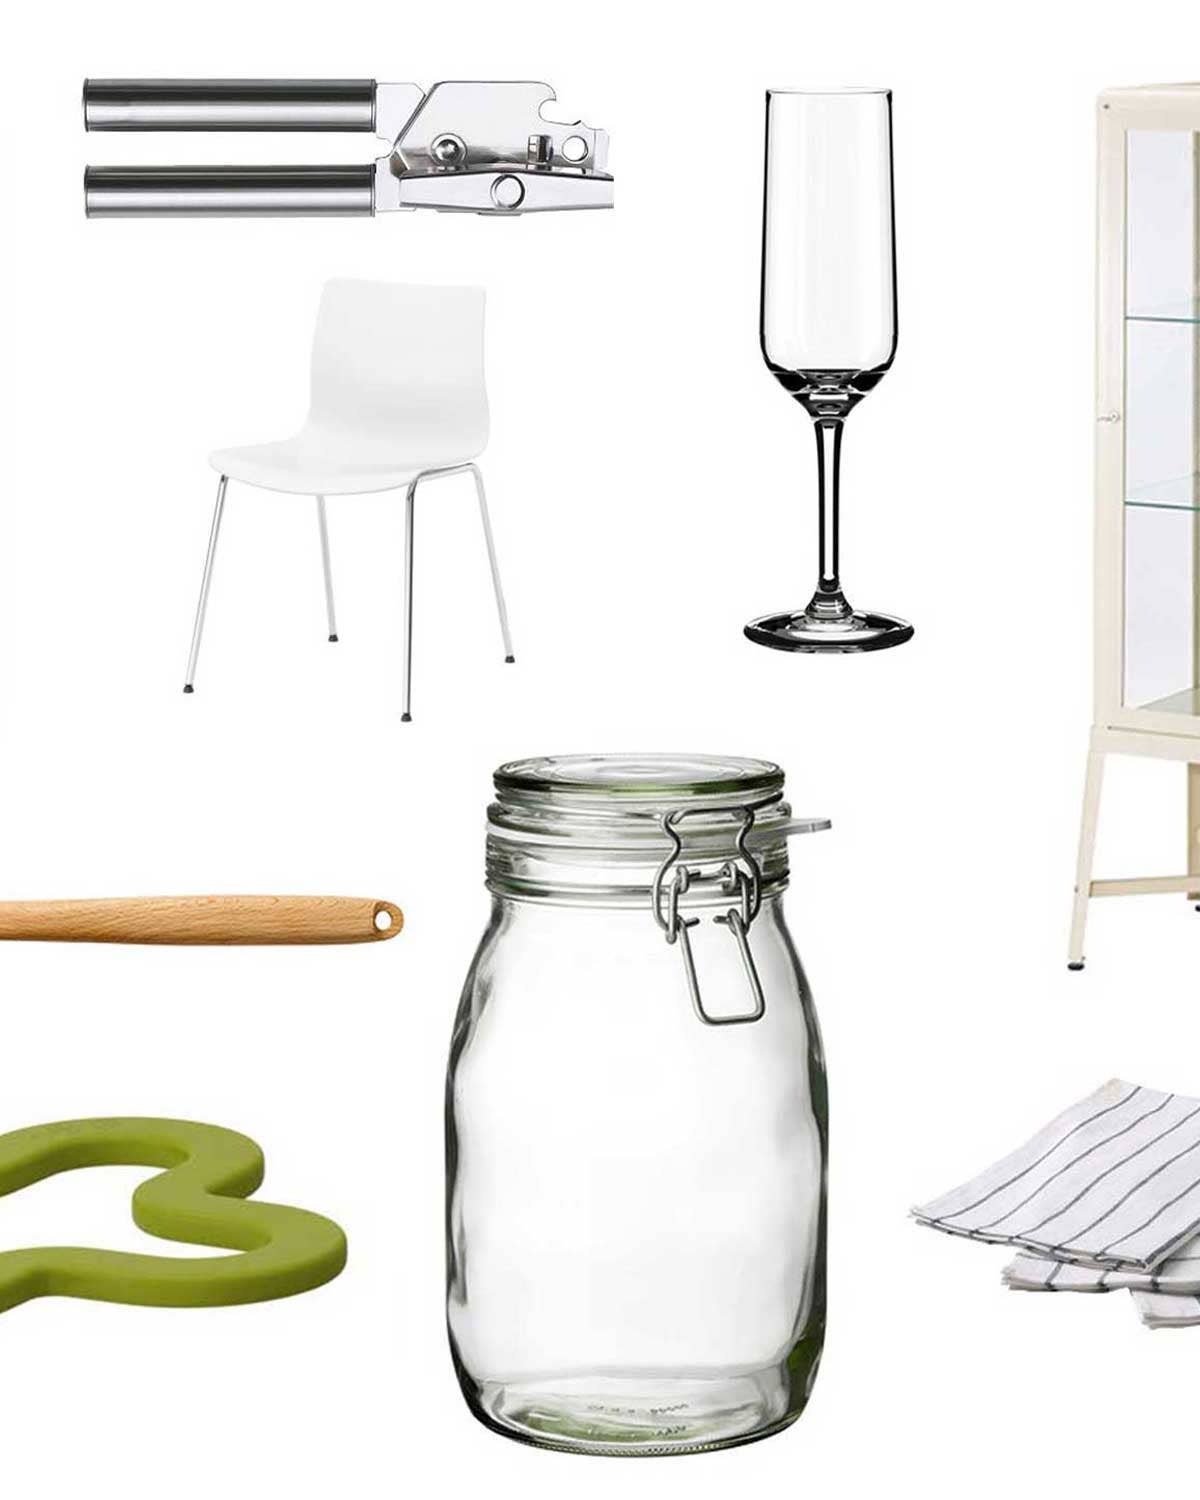 The Ikea Products Even Chefs Can’t Help But Love